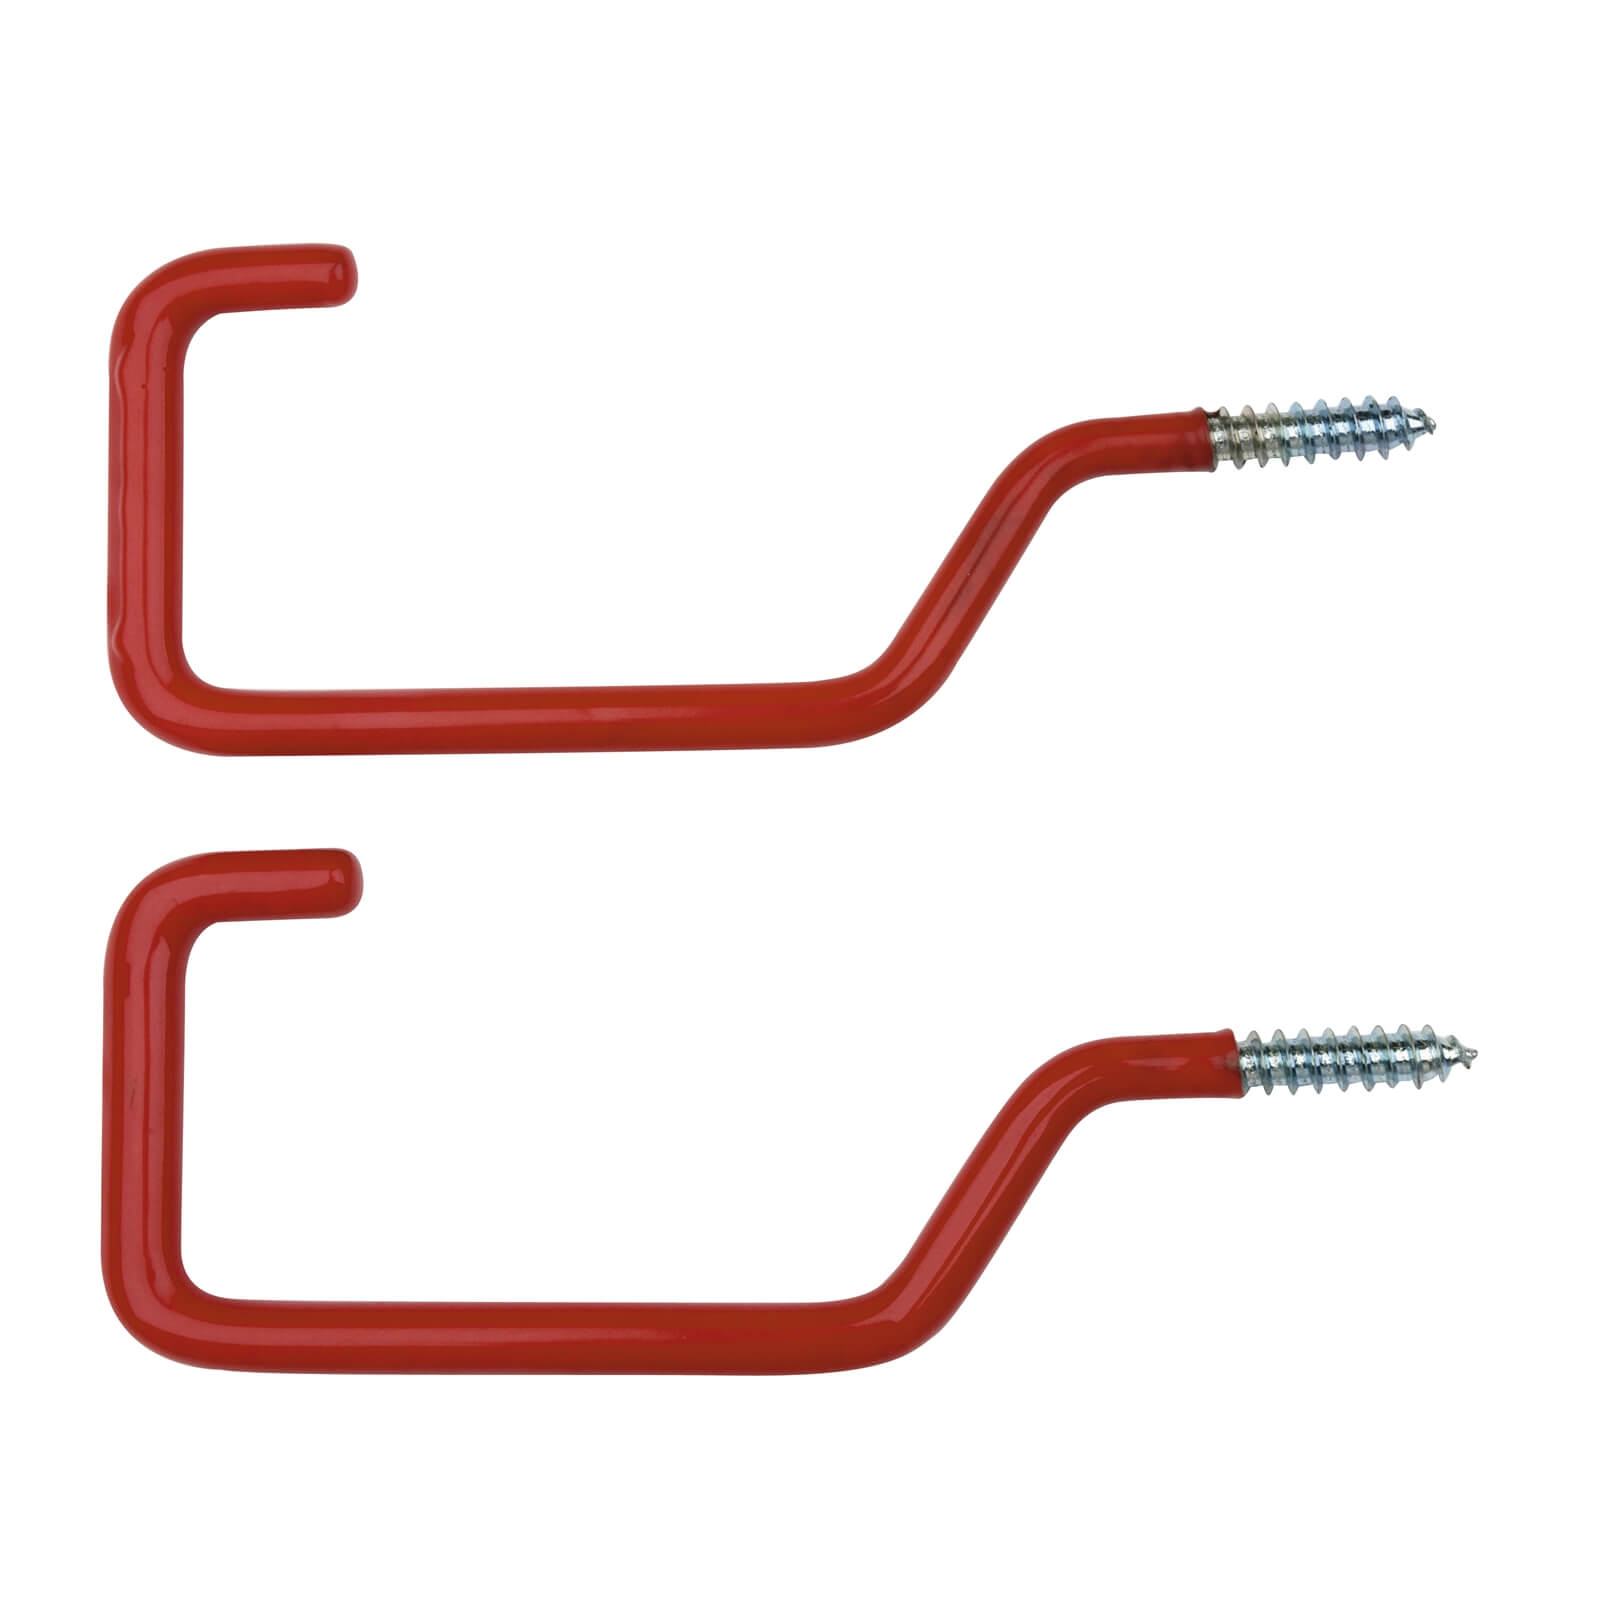 Photo of Universal Hook - 2 Pack